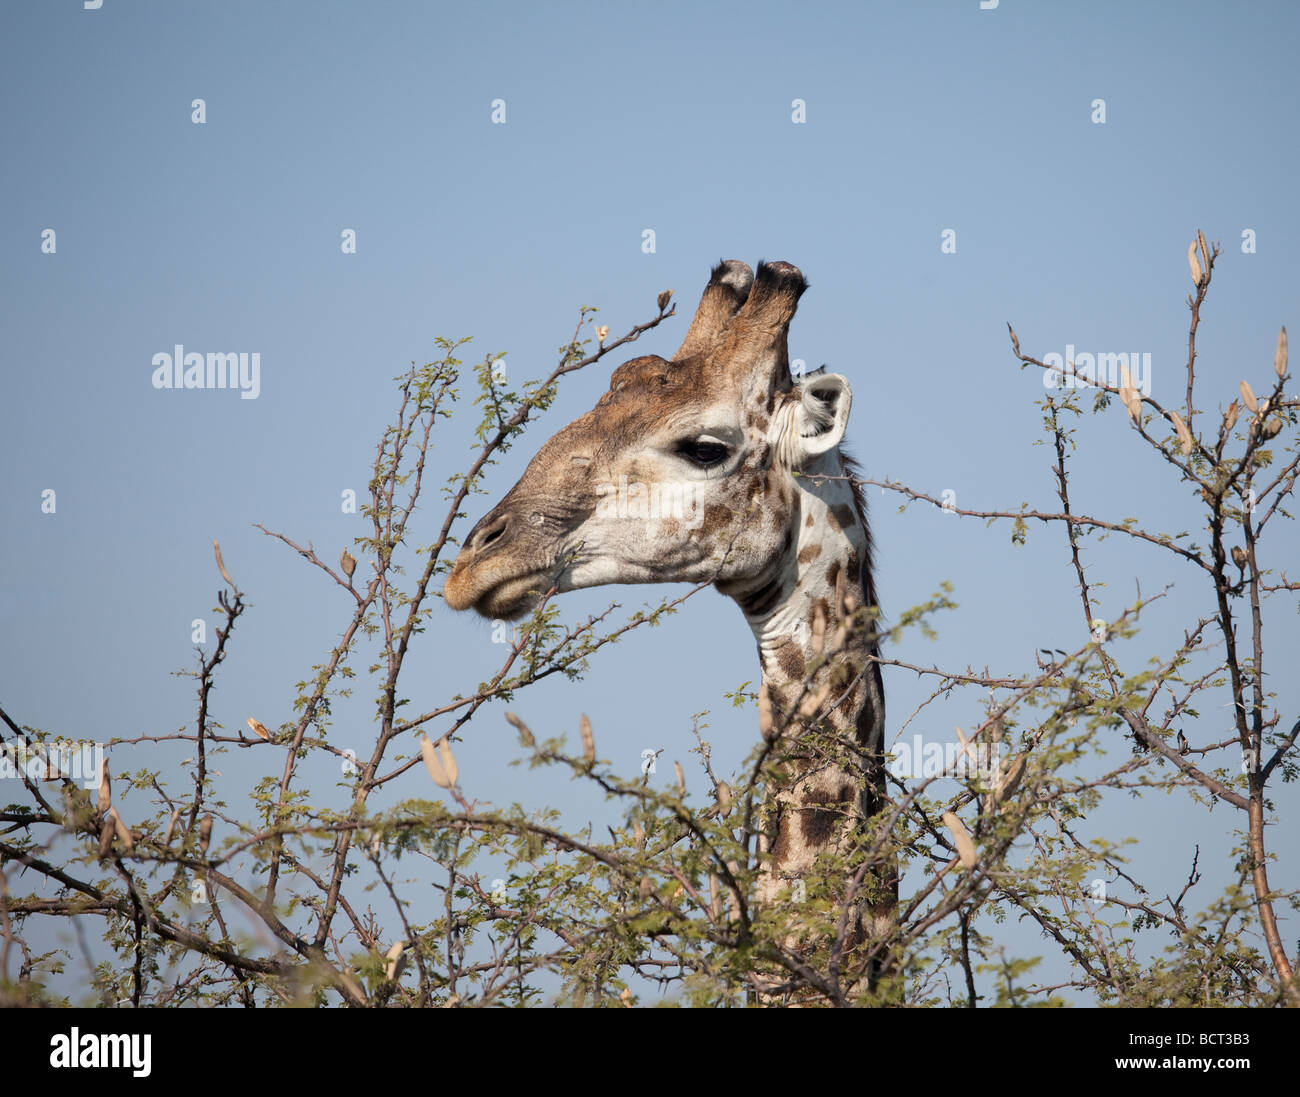 Male South African Giraffe head looking over an acacia tree Stock Photo